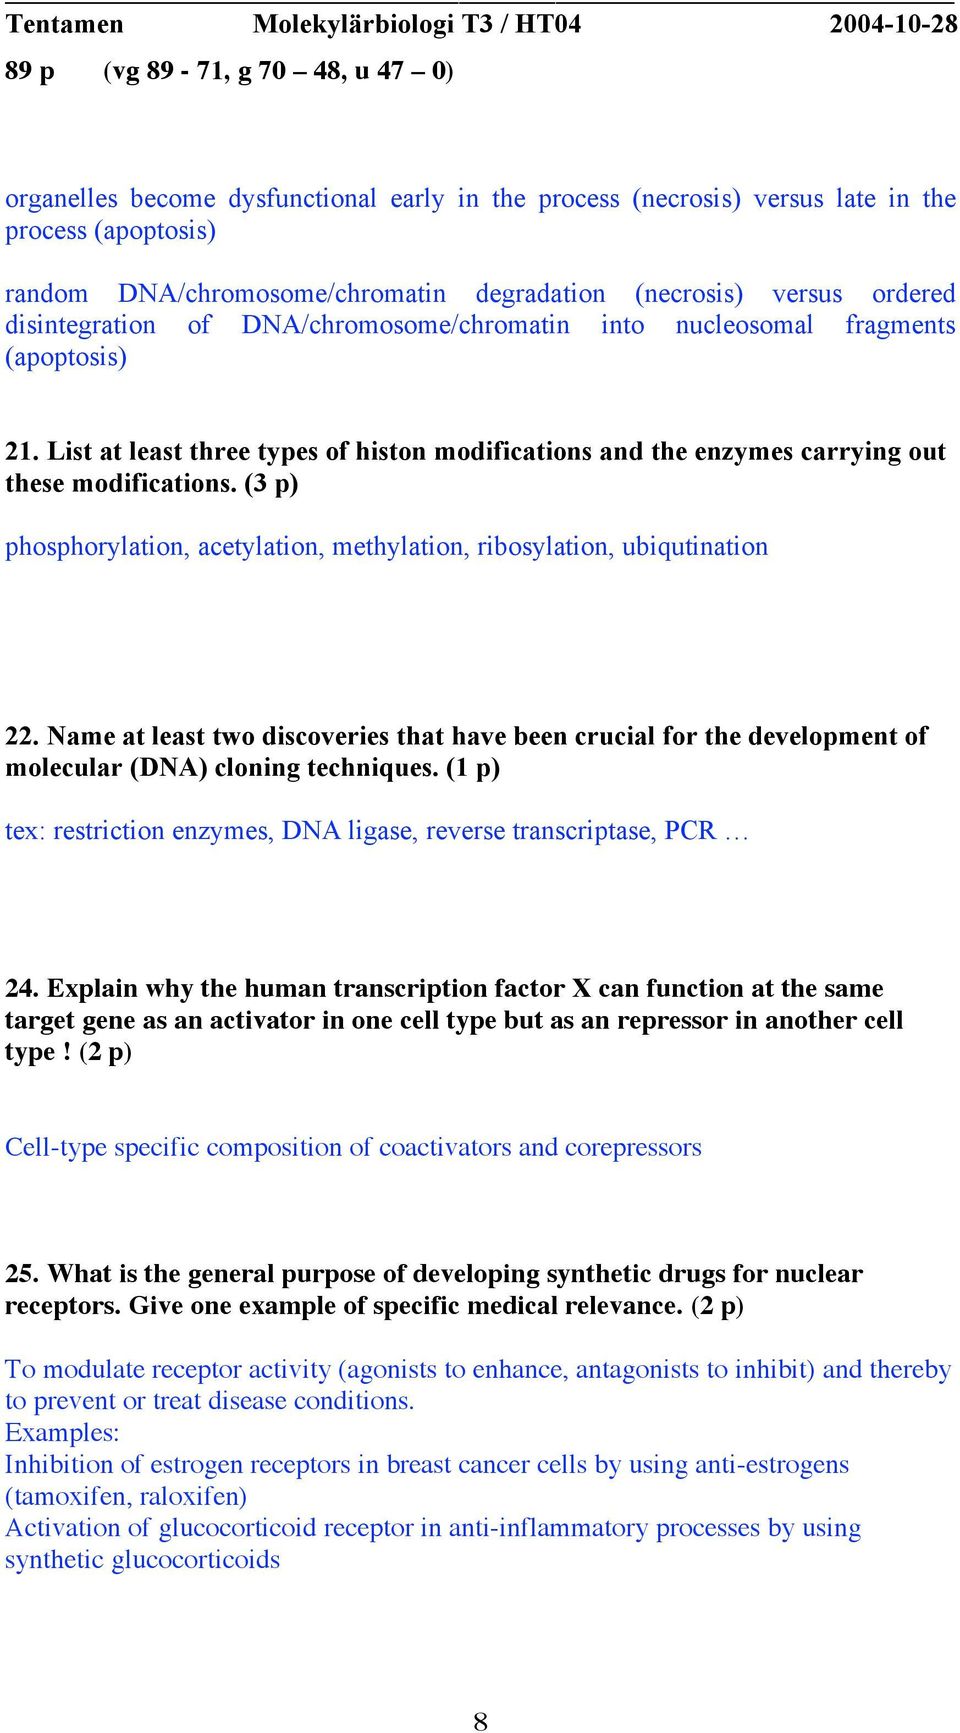 (3 p) phosphorylation, acetylation, methylation, ribosylation, ubiqutination 22. Name at least two discoveries that have been crucial for the development of molecular (DNA) cloning techniques.